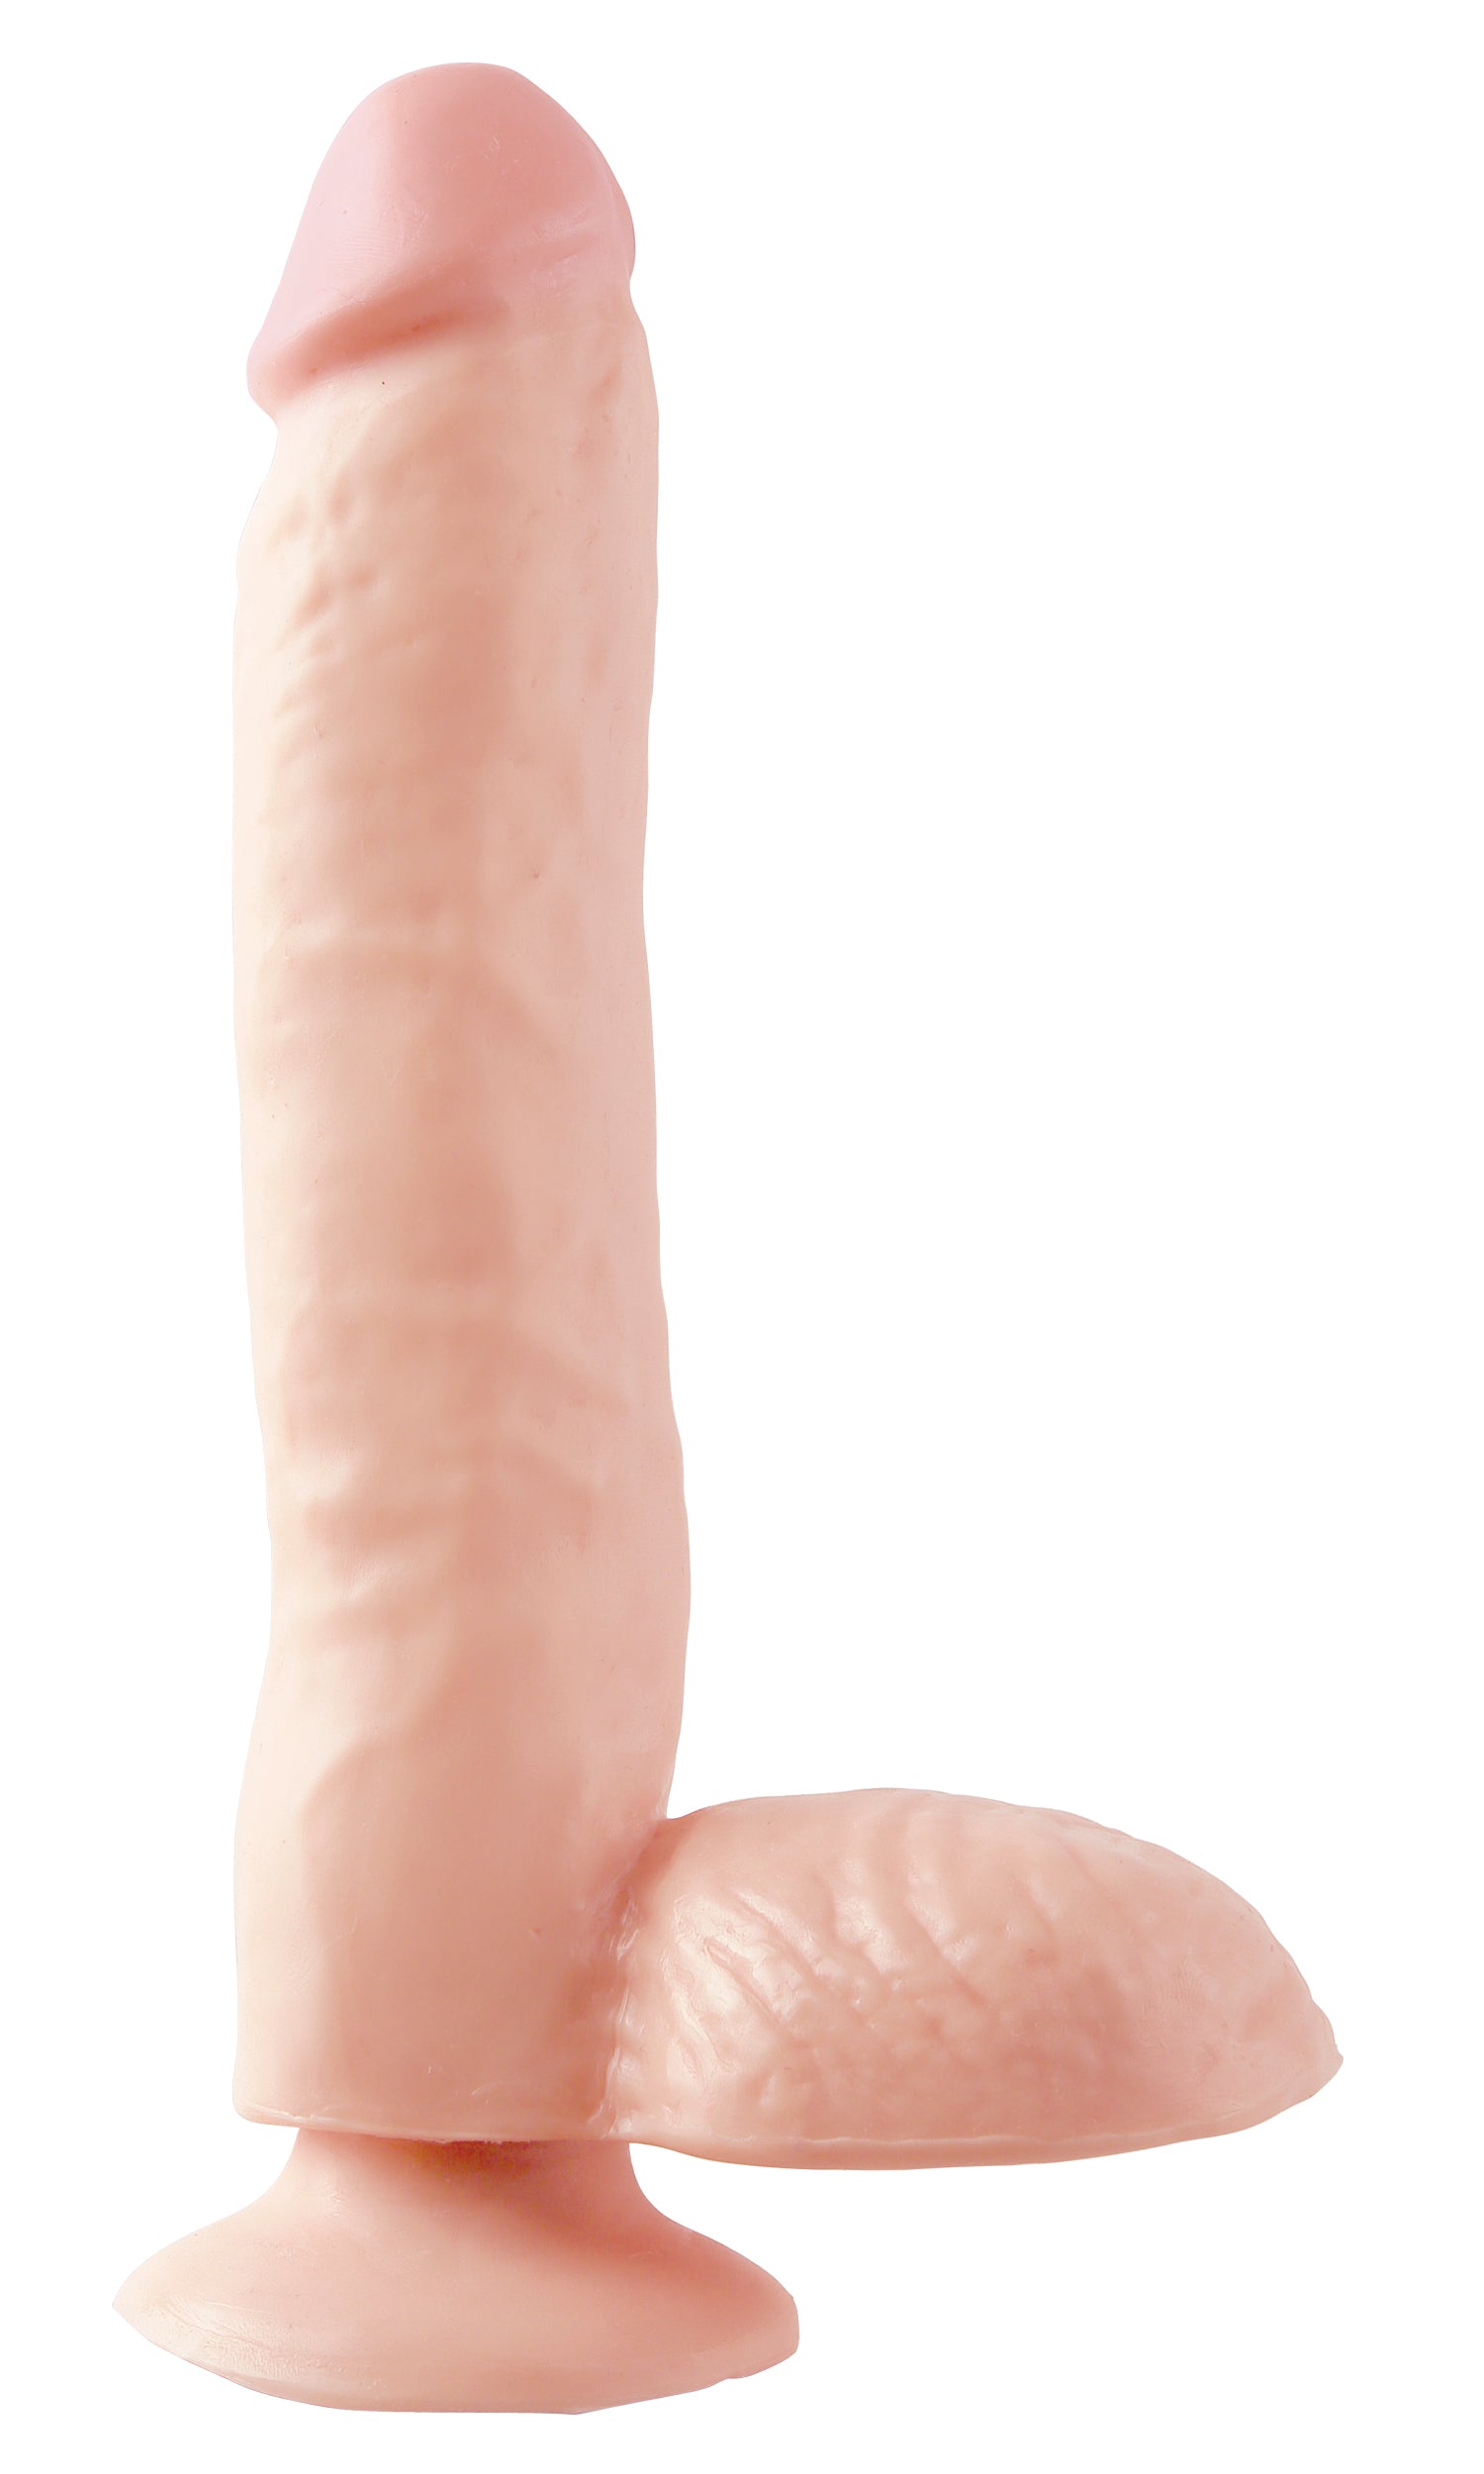 Basix Rubber Works 9 Inch Dong With Suction Cup - Flesh PD4230-21